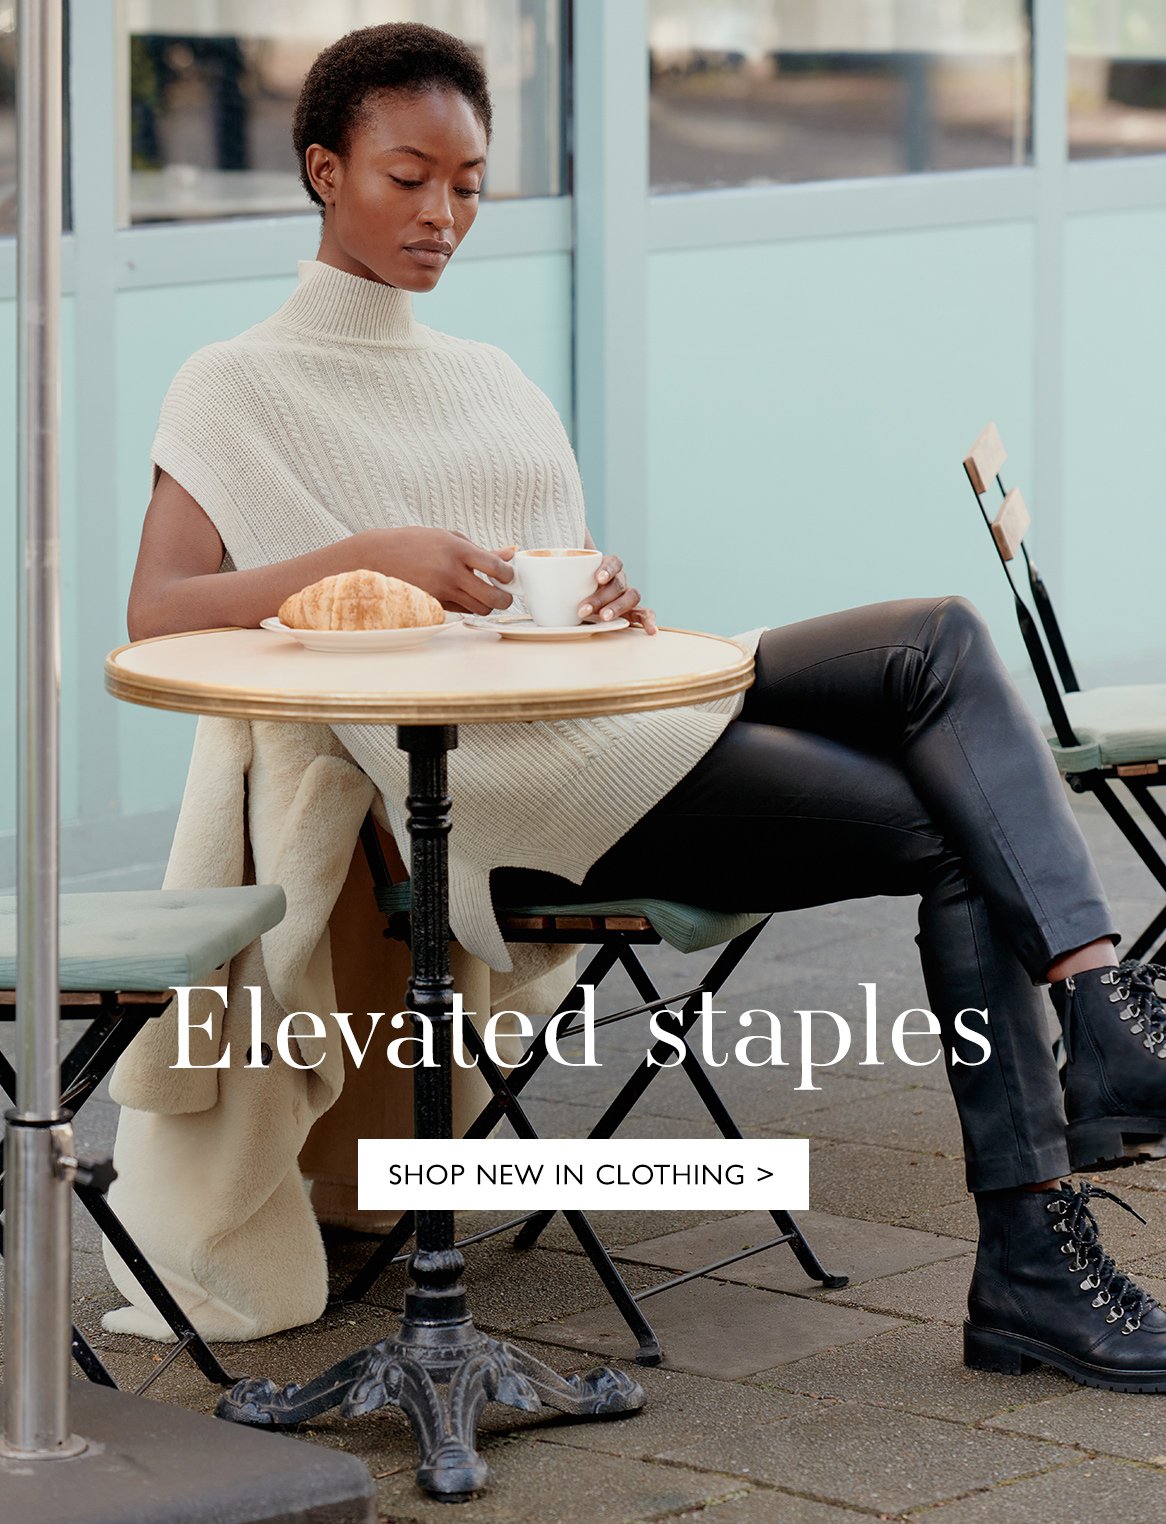 Elevated staples | SHOP NEW IN CLOTHING